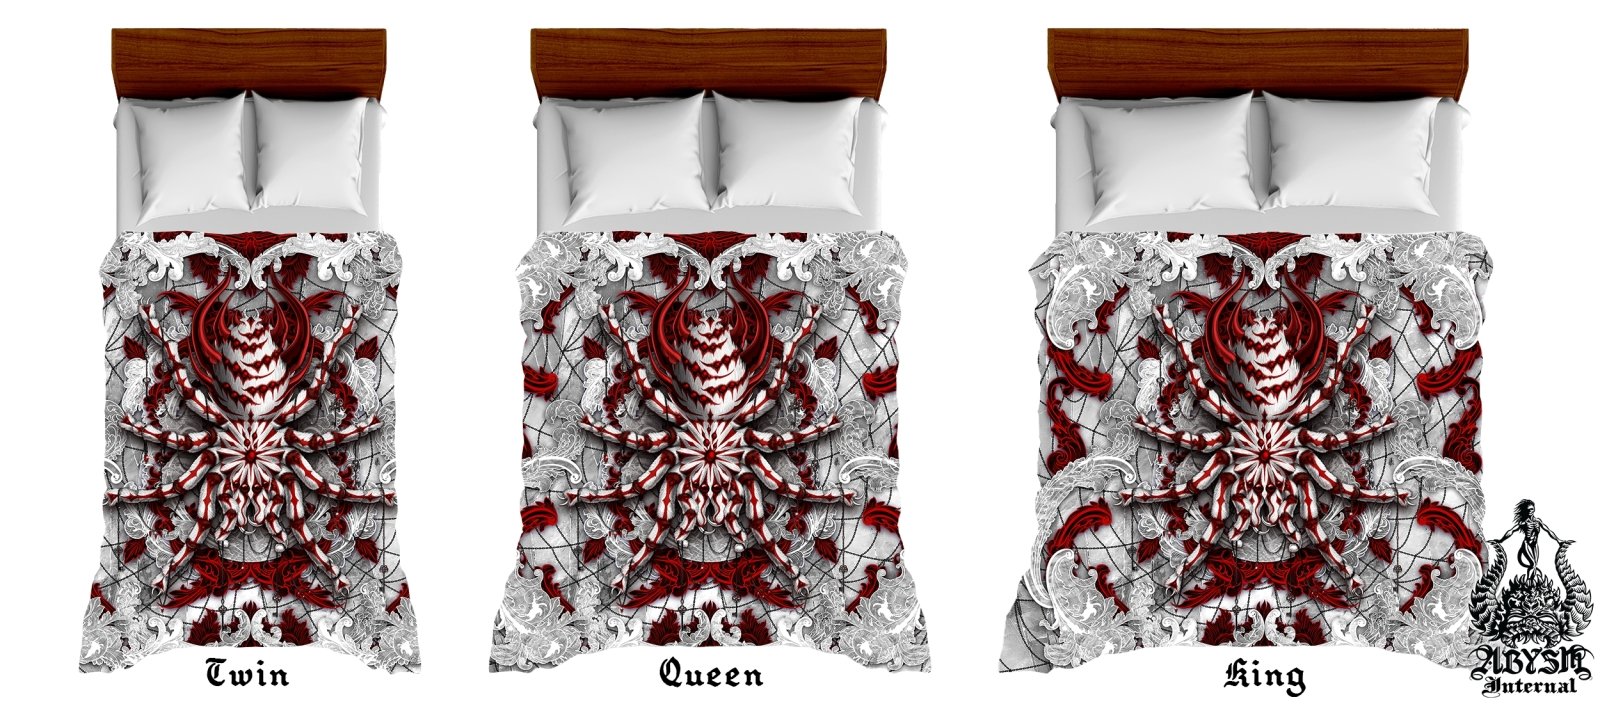 Gothic Spider Bedding Set, Comforter and Duvet, Bed Cover and Bedroom Decor, King, Queen and Twin Size - Tarantula Bloody White Goth - Abysm Internal